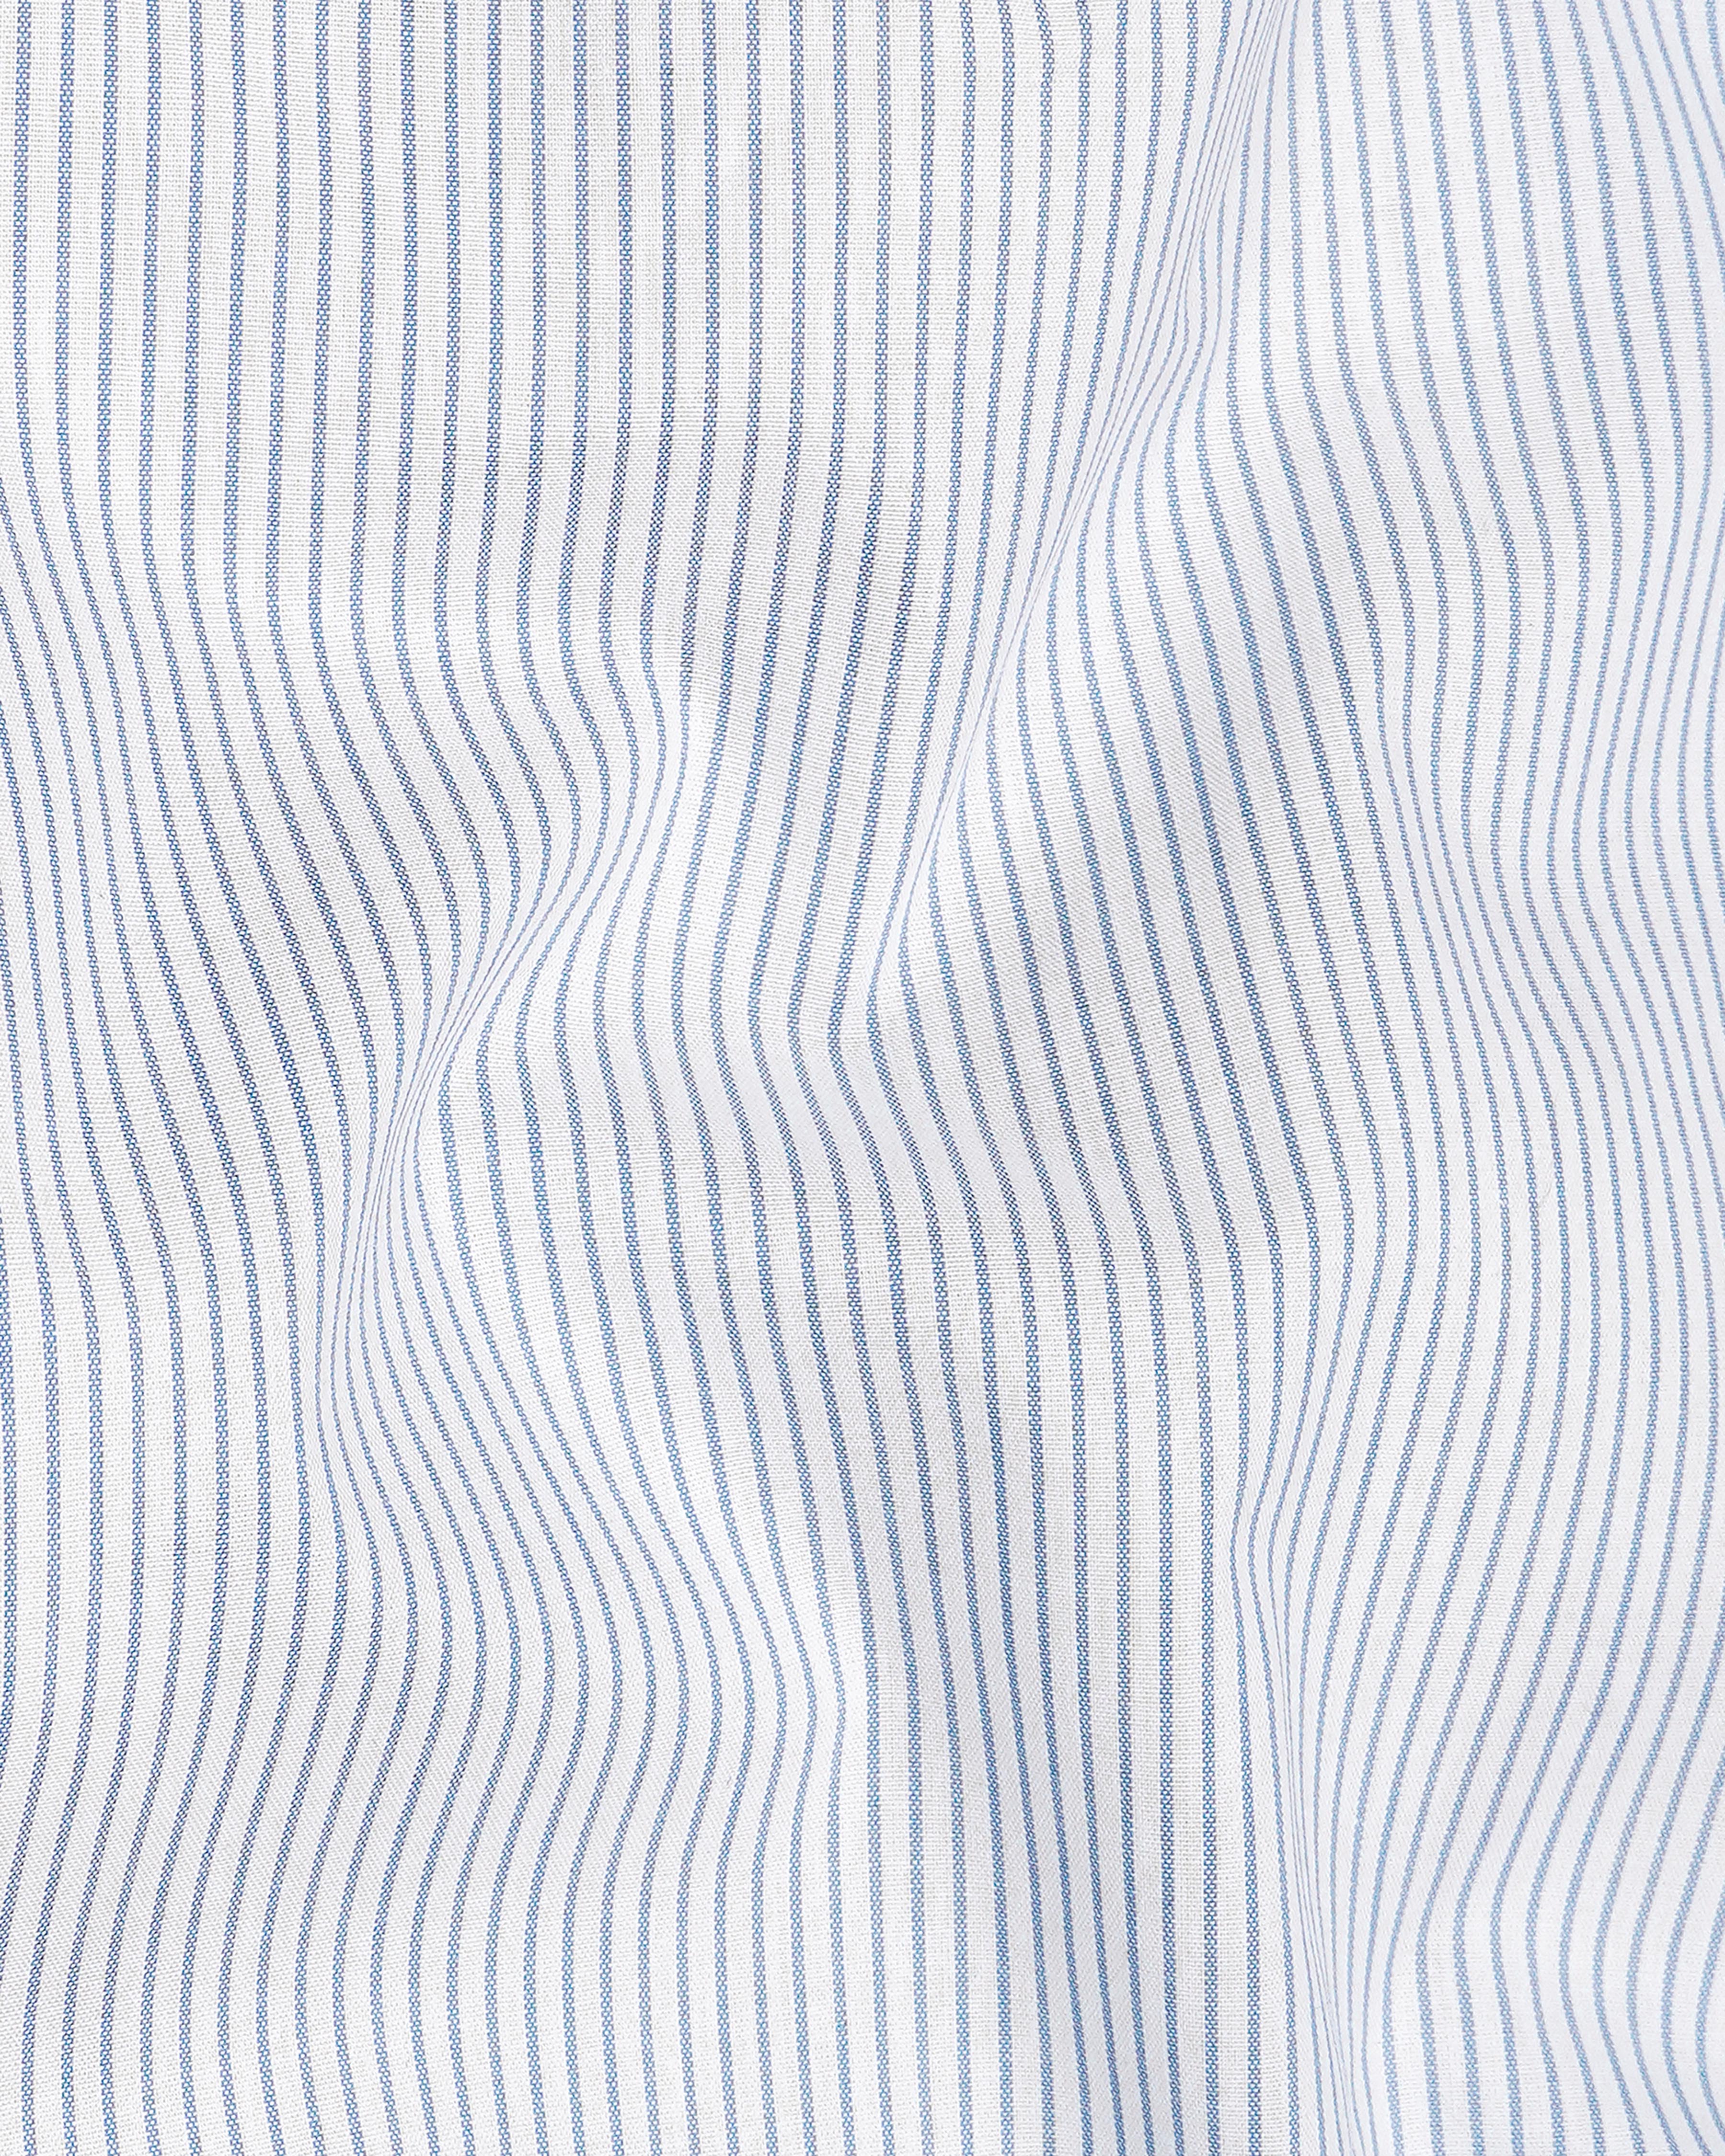 Bright White with Chateau Blue Pin Striped Premium Cotton Shirt 8120-CA-38, 8120-CA-H-38, 8120-CA-39, 8120-CA-H-39, 8120-CA-40, 8120-CA-H-40, 8120-CA-42, 8120-CA-H-42, 8120-CA-44, 8120-CA-H-44, 8120-CA-46, 8120-CA-H-46, 8120-CA-48, 8120-CA-H-48, 8120-CA-50, 8120-CA-H-50, 8120-CA-52, 8120-CA-H-52